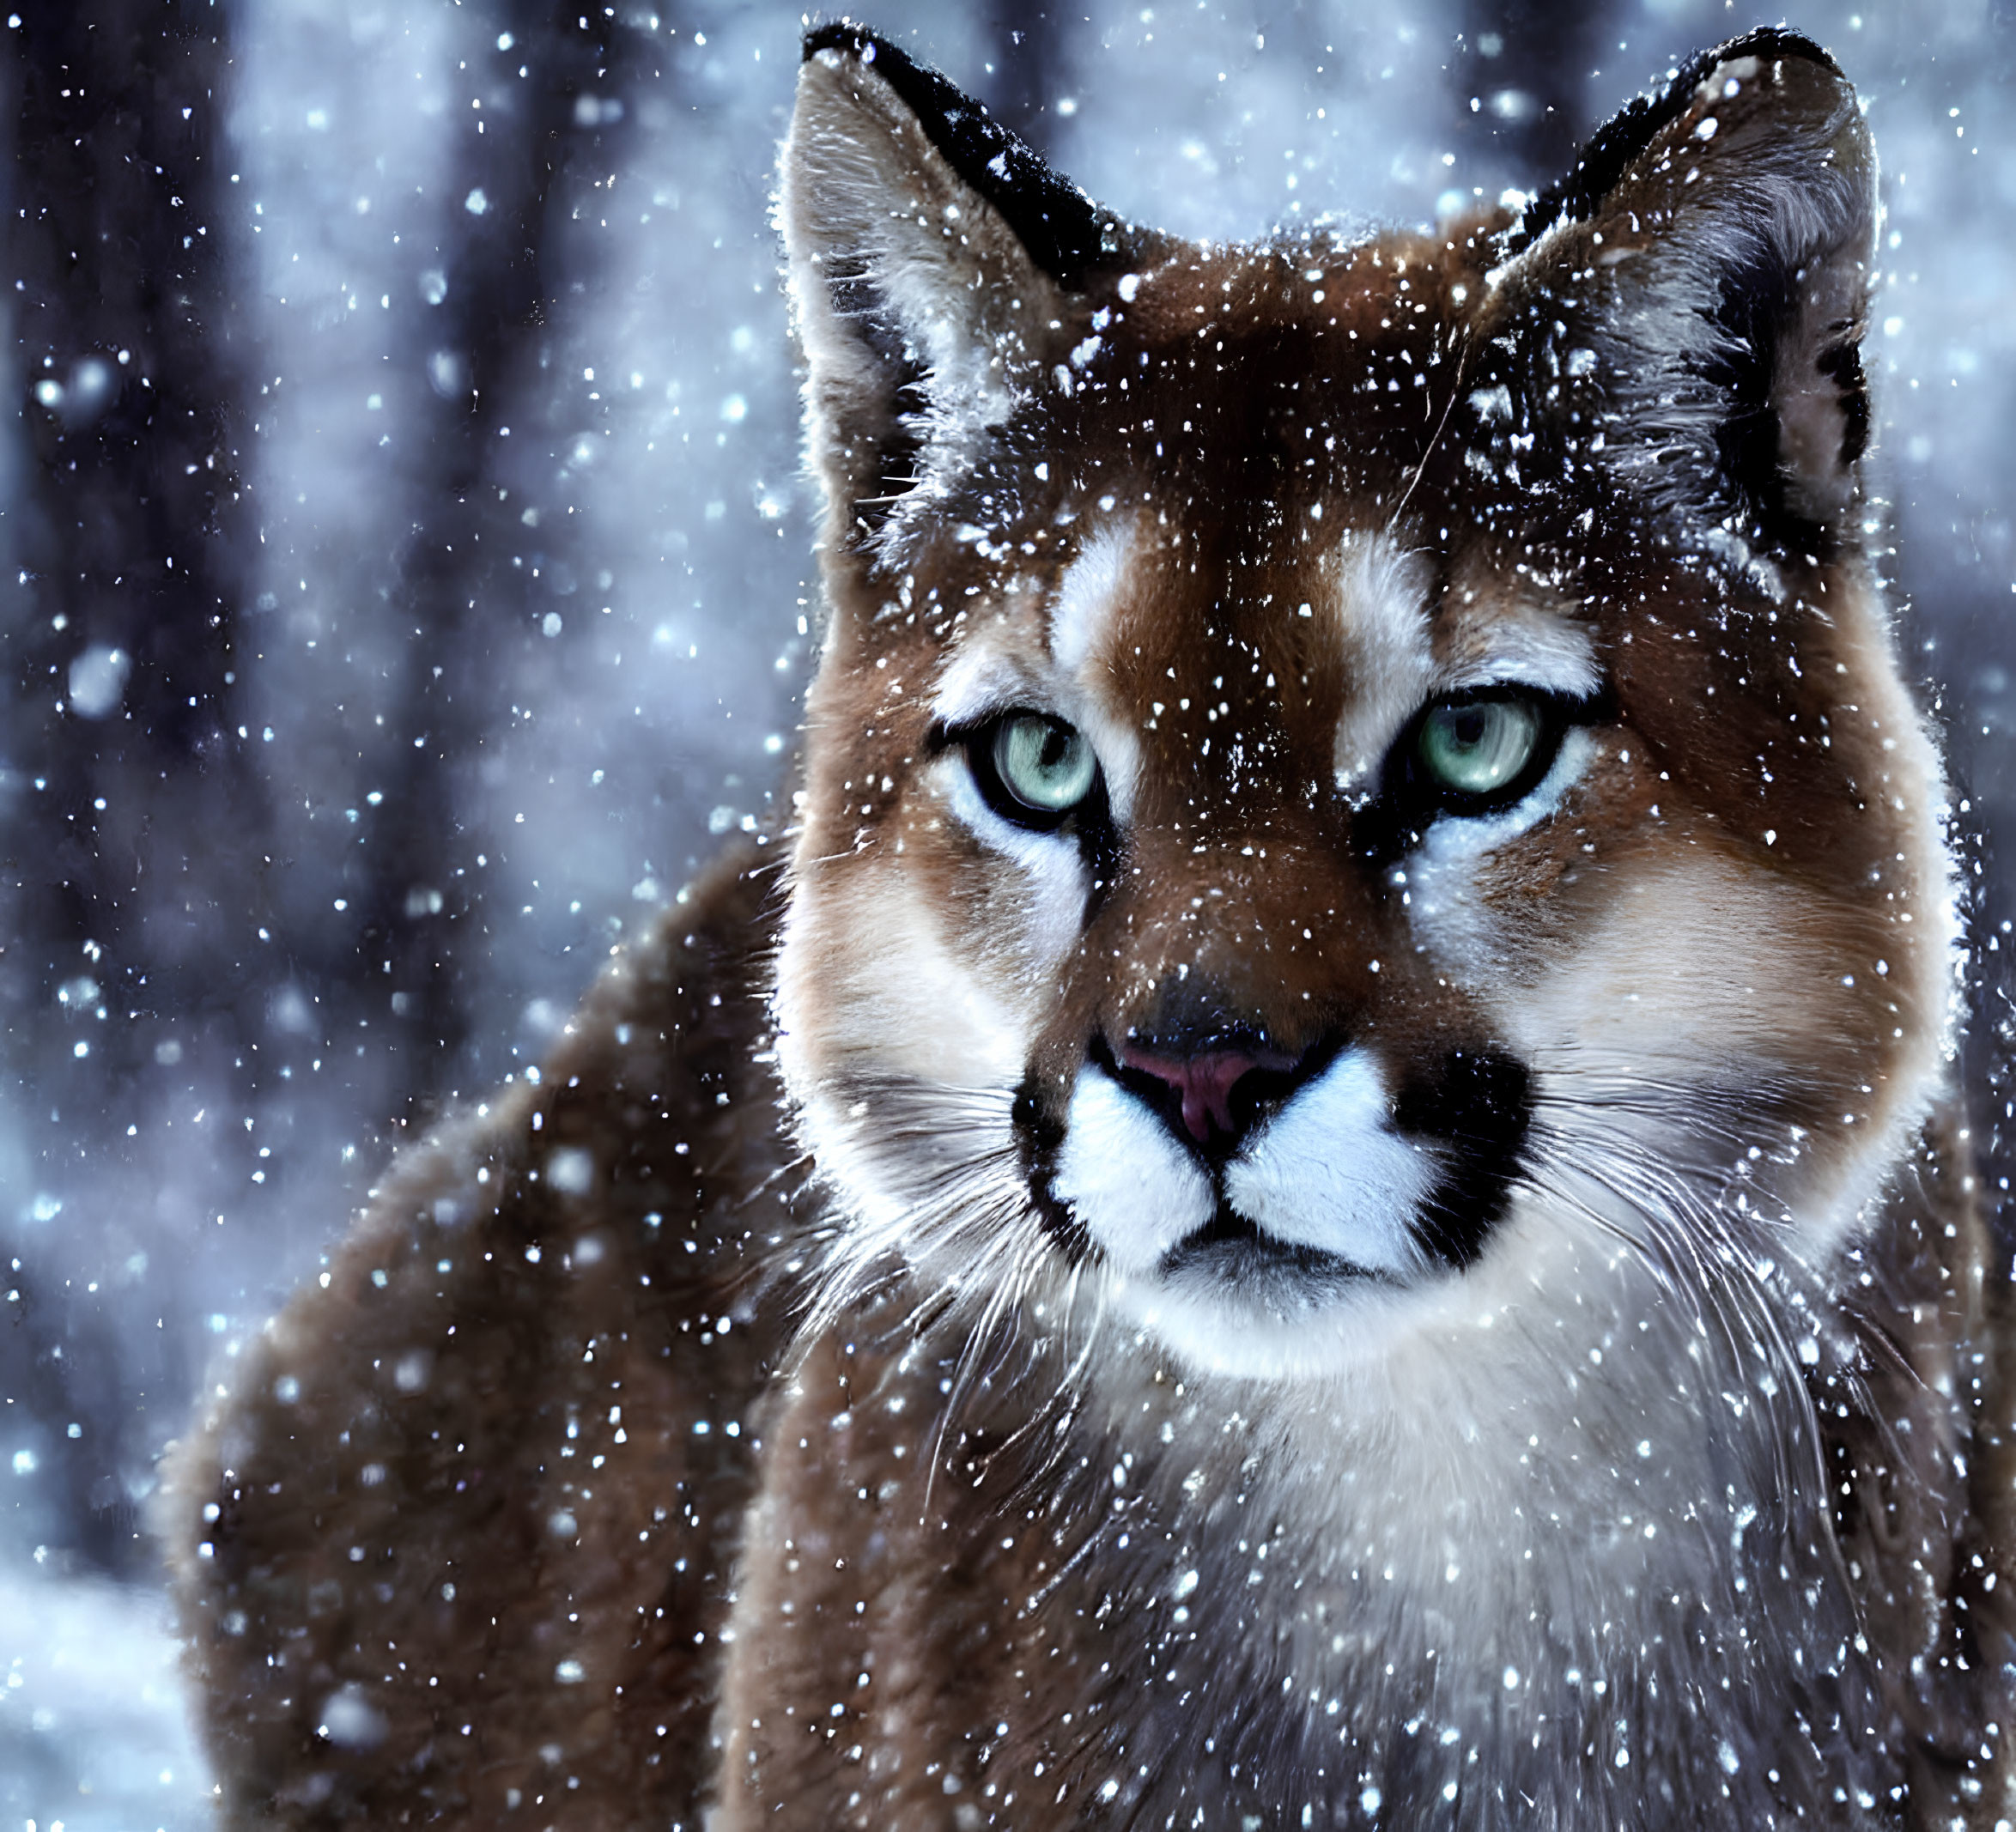 Majestic mountain lion with green eyes in snowy scene